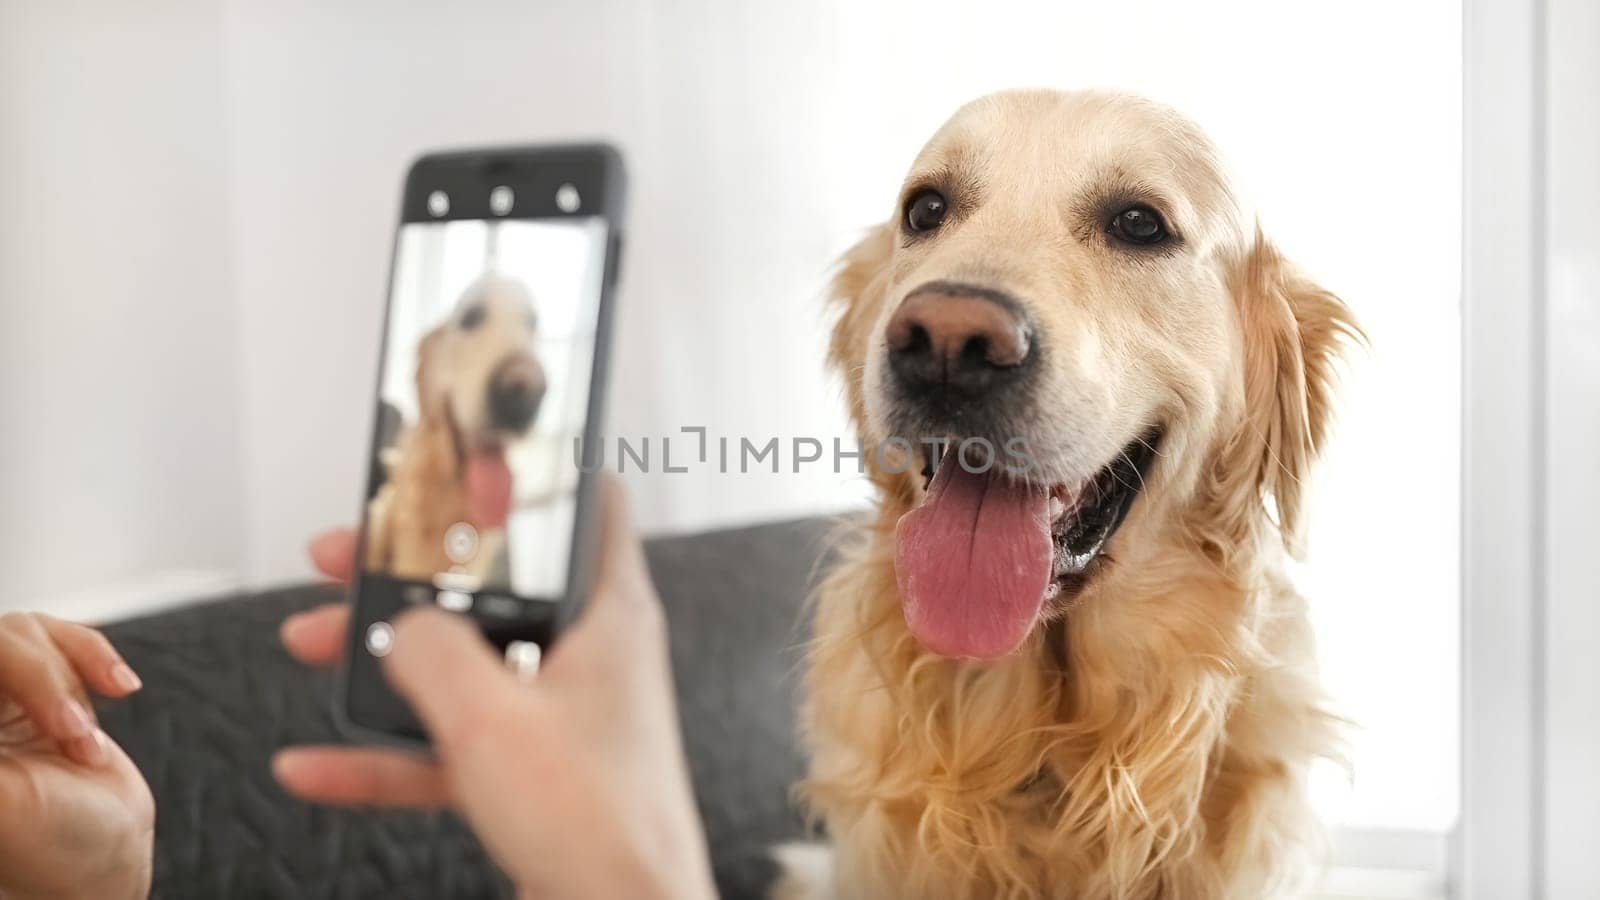 Girl hand with smartphone taking photo of golden retriever dog at home. Young woman photograph creates pet doggy shots with cell phone camera closeup